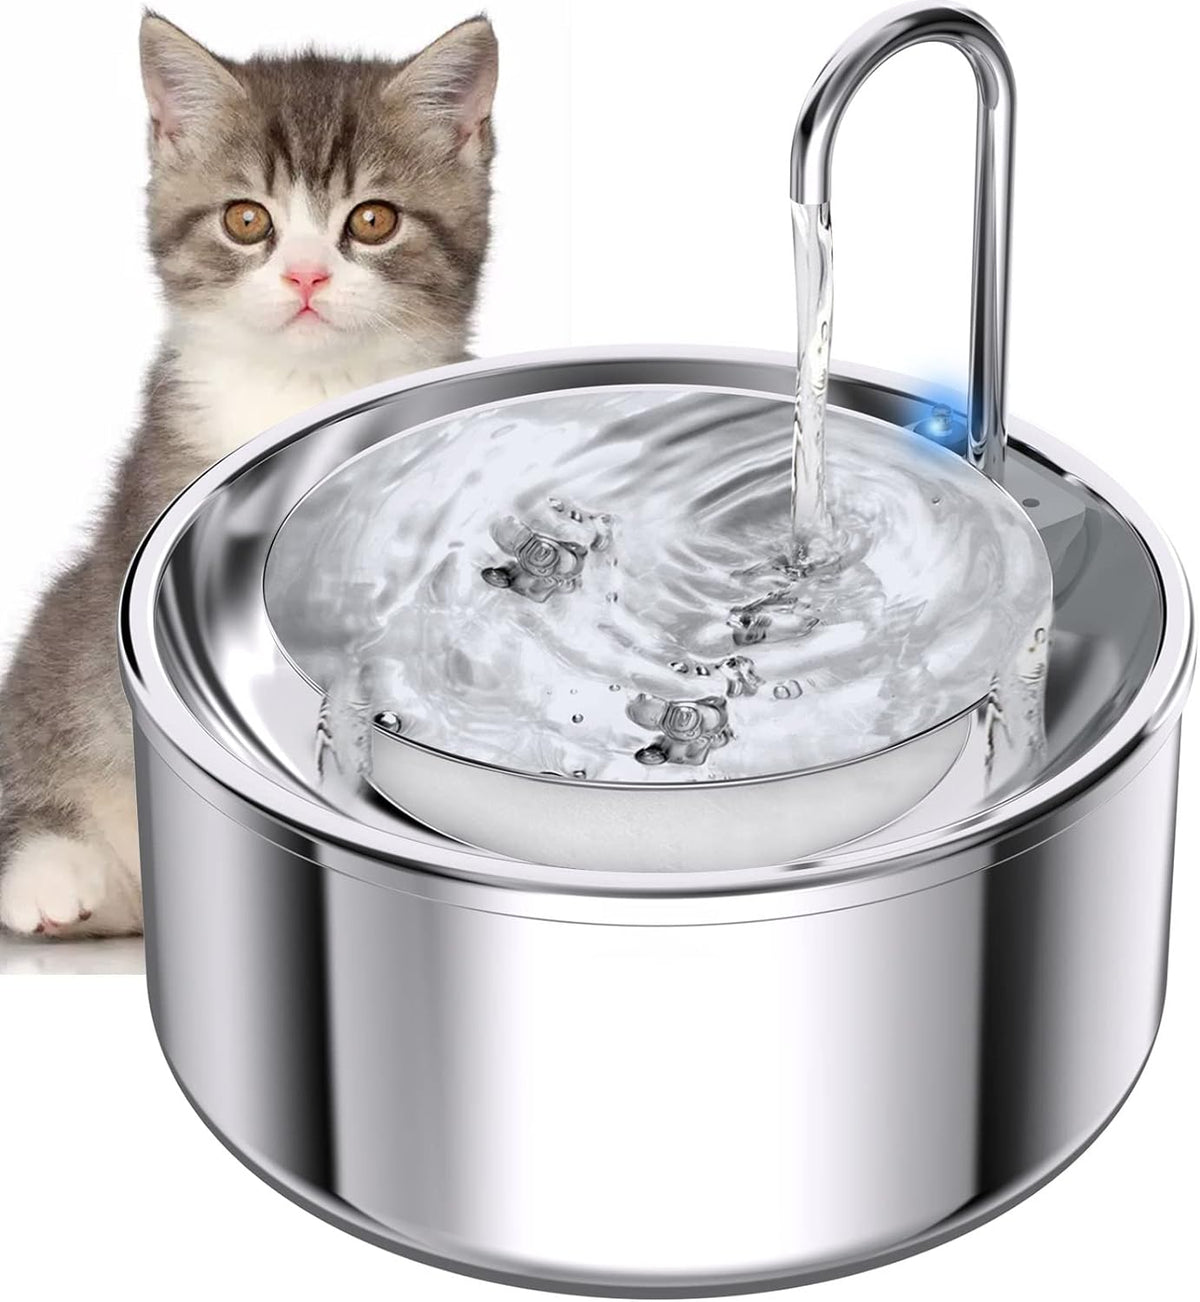 EALLOO Cat Water Fountain Stainless Steel, 2.5L/84oz Automatic Pet Water Fountain for Cats Inside, Dog Water Dispenser, Ultra-Quiet Pump with Led Light, 3 Replacement Filters